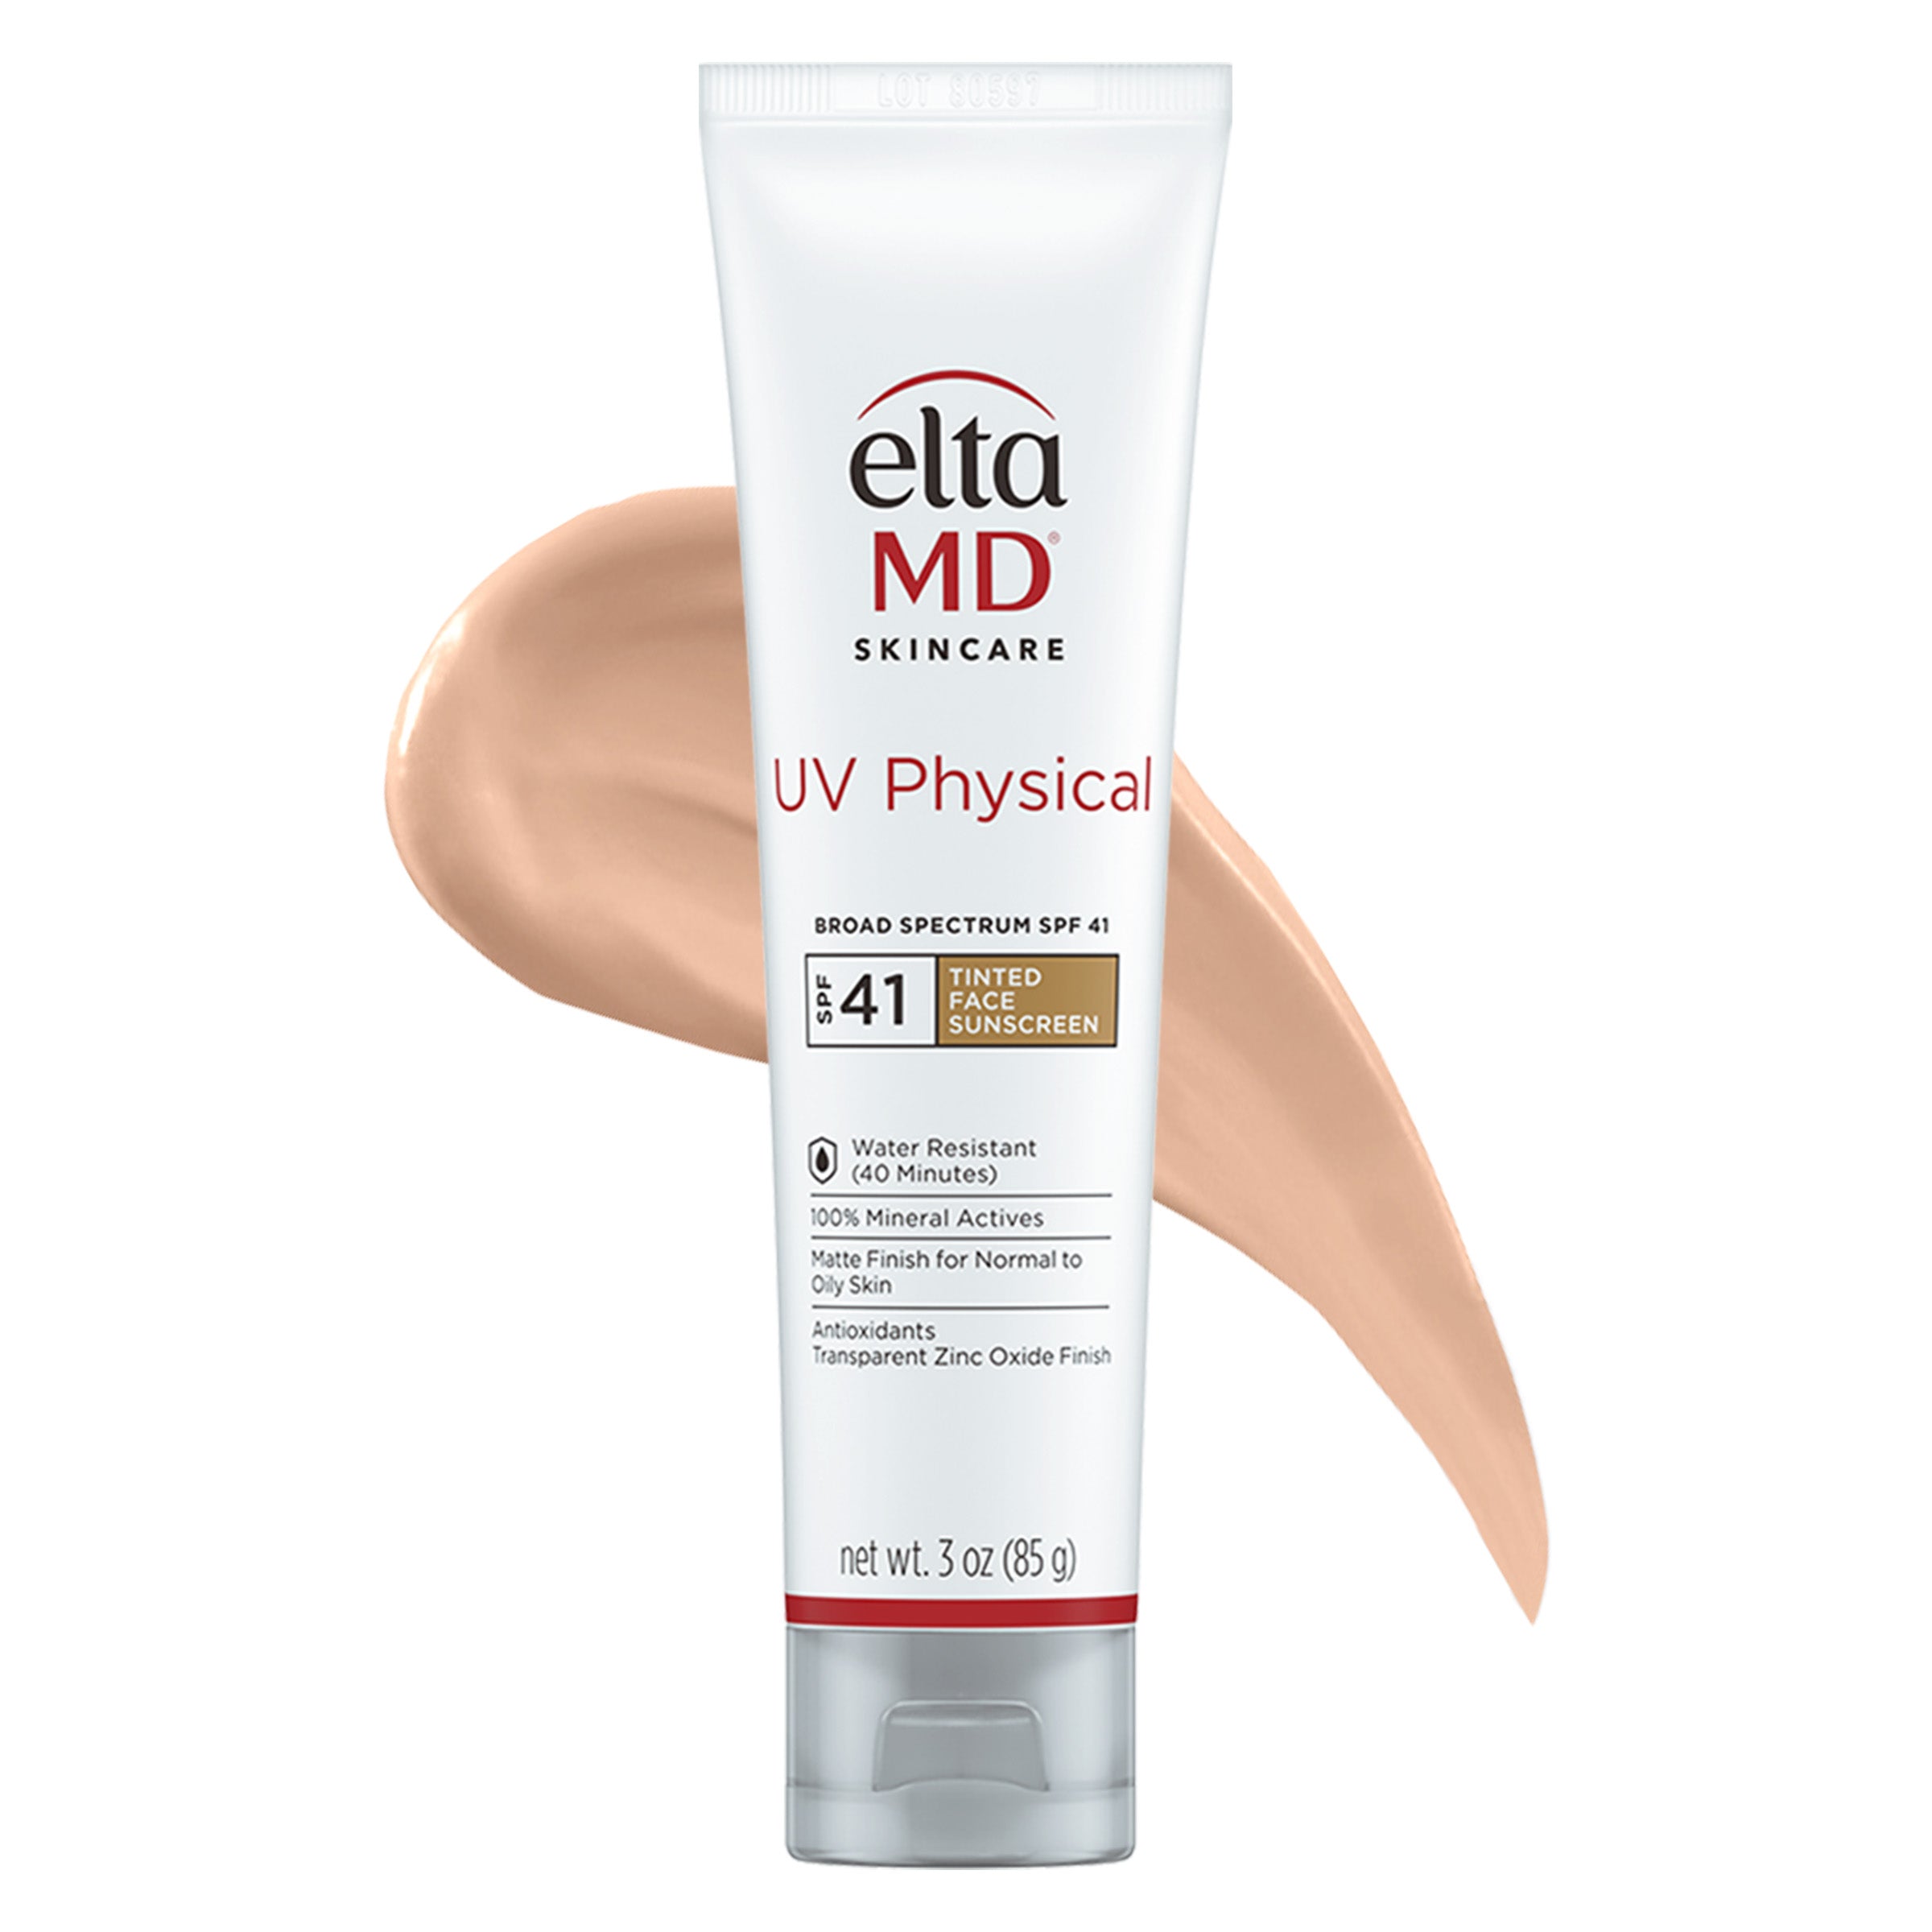 EltaMD UV Physical Broad Spectrum SPF 41 Tinted Face Sunscreen shop at Exclusive Beauty Club